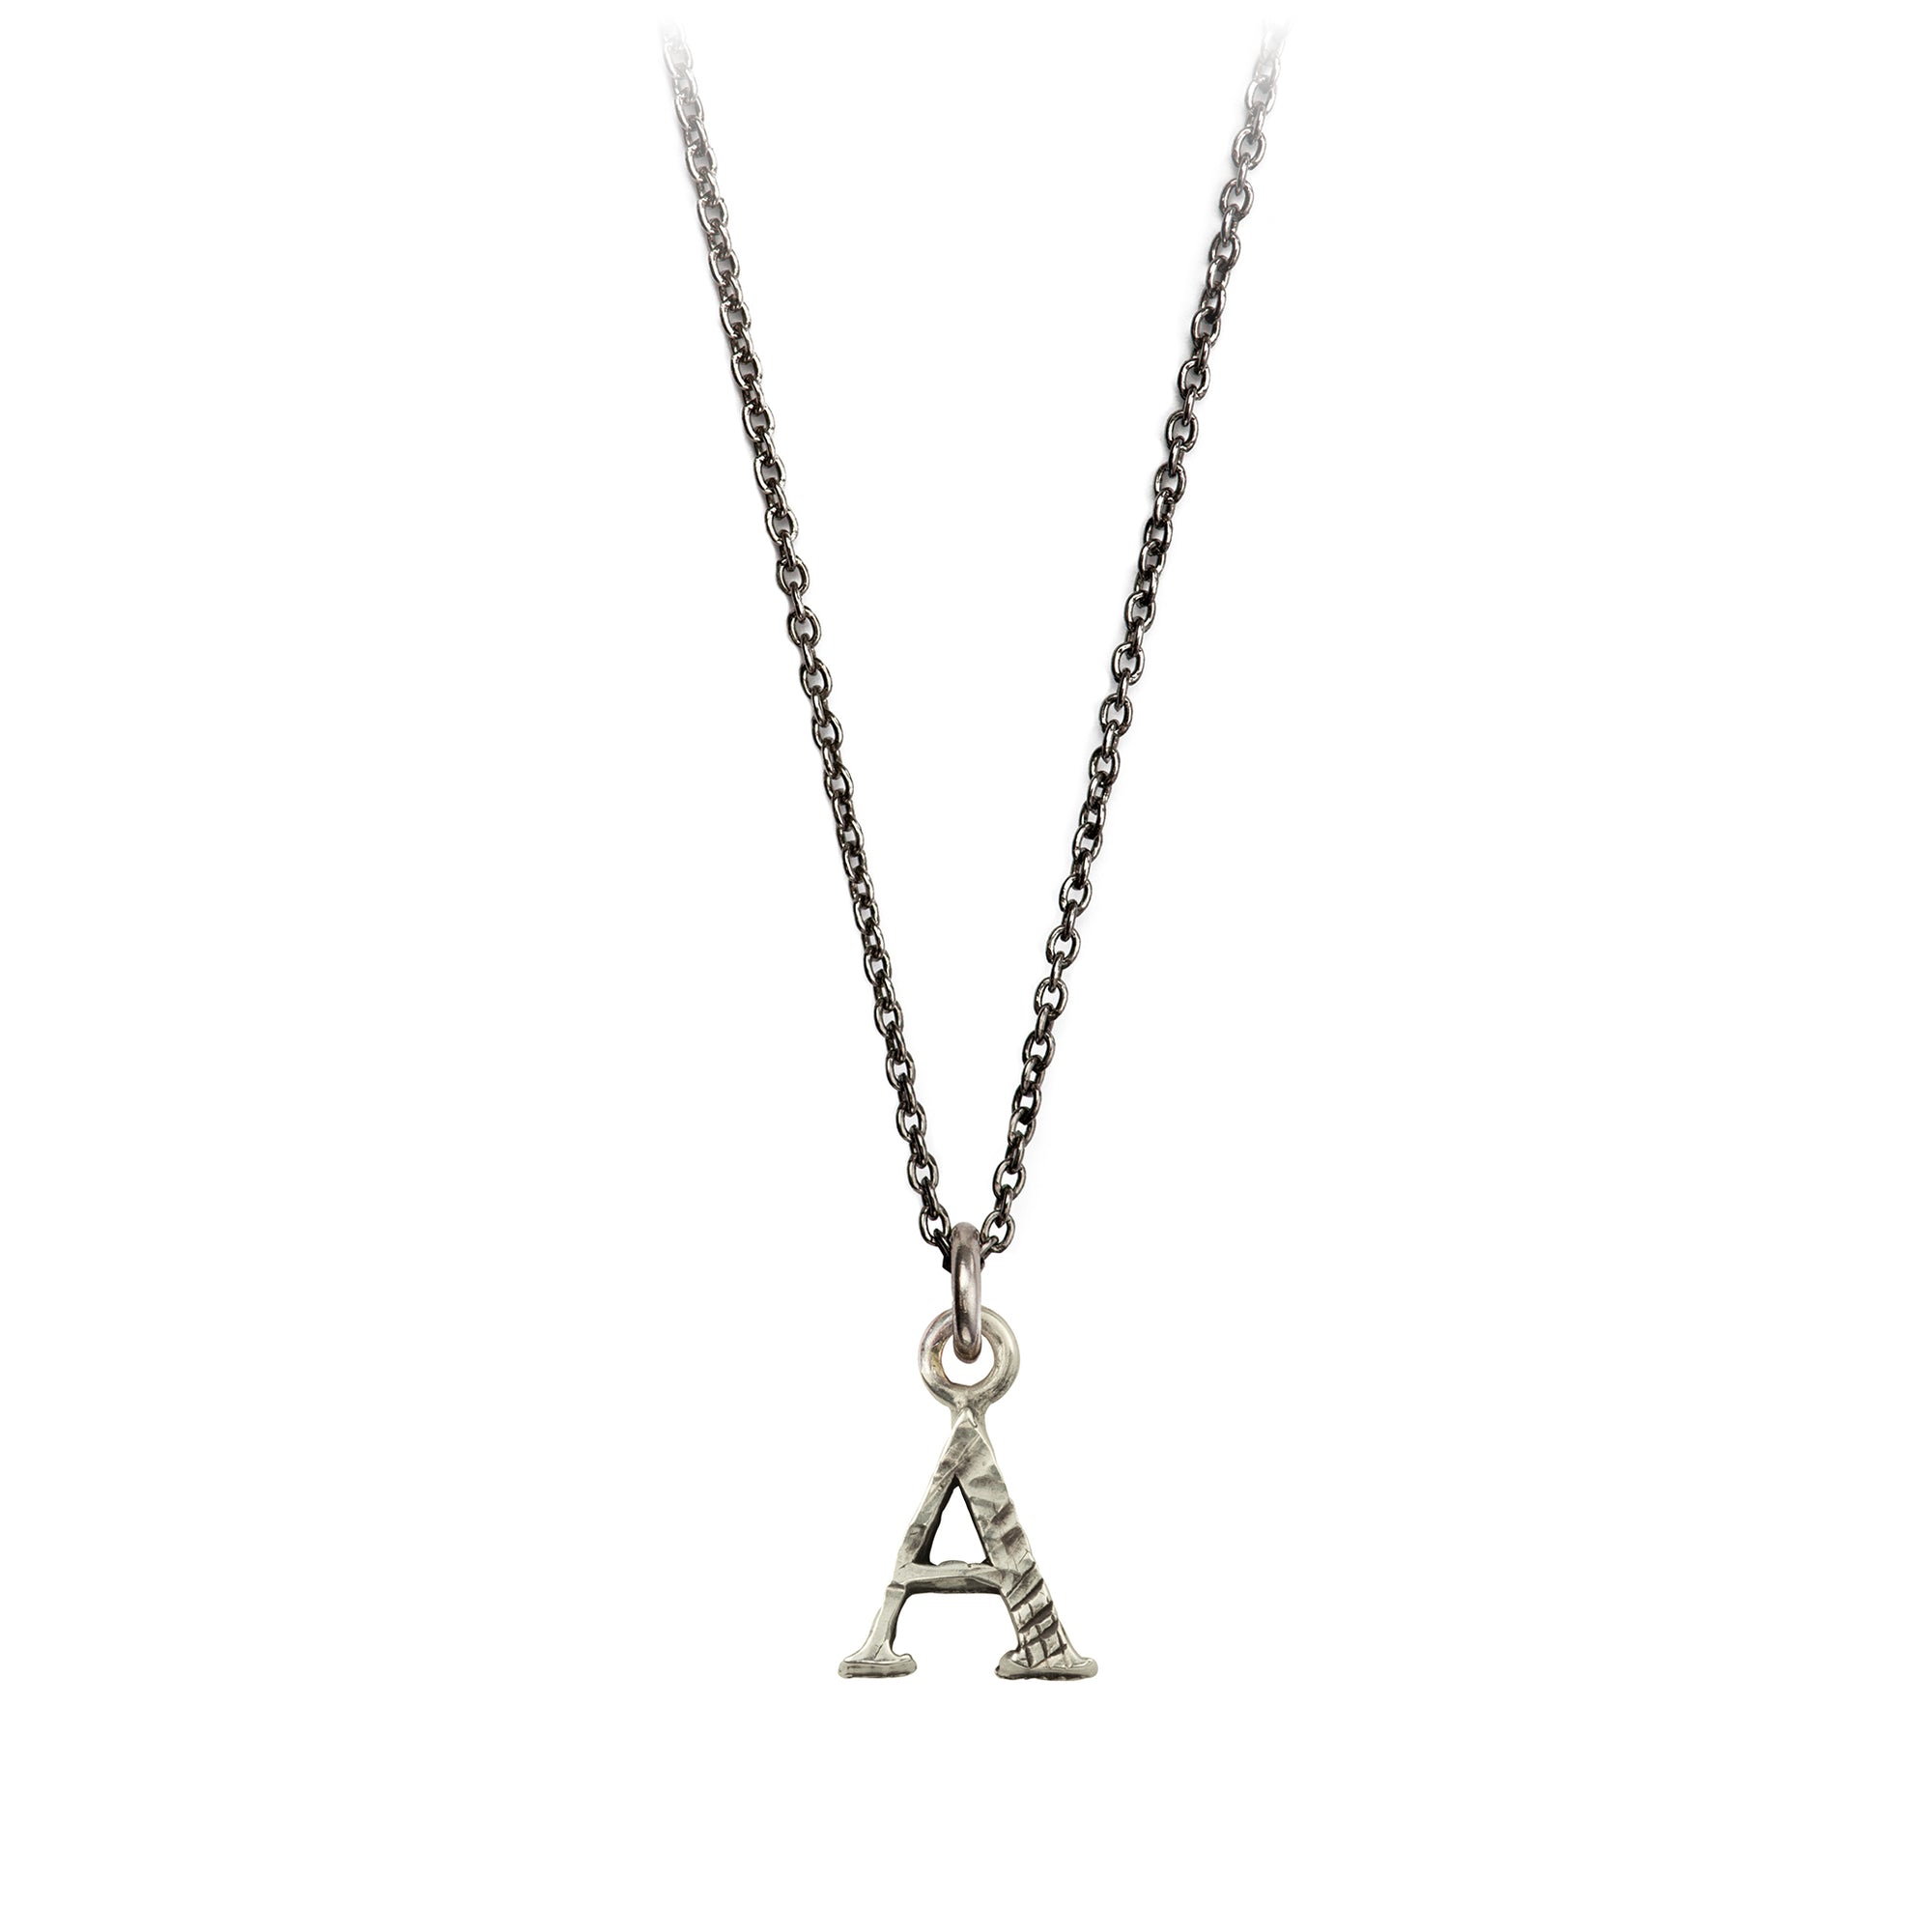 A sterling silver letter "A" charm on a silver chain.